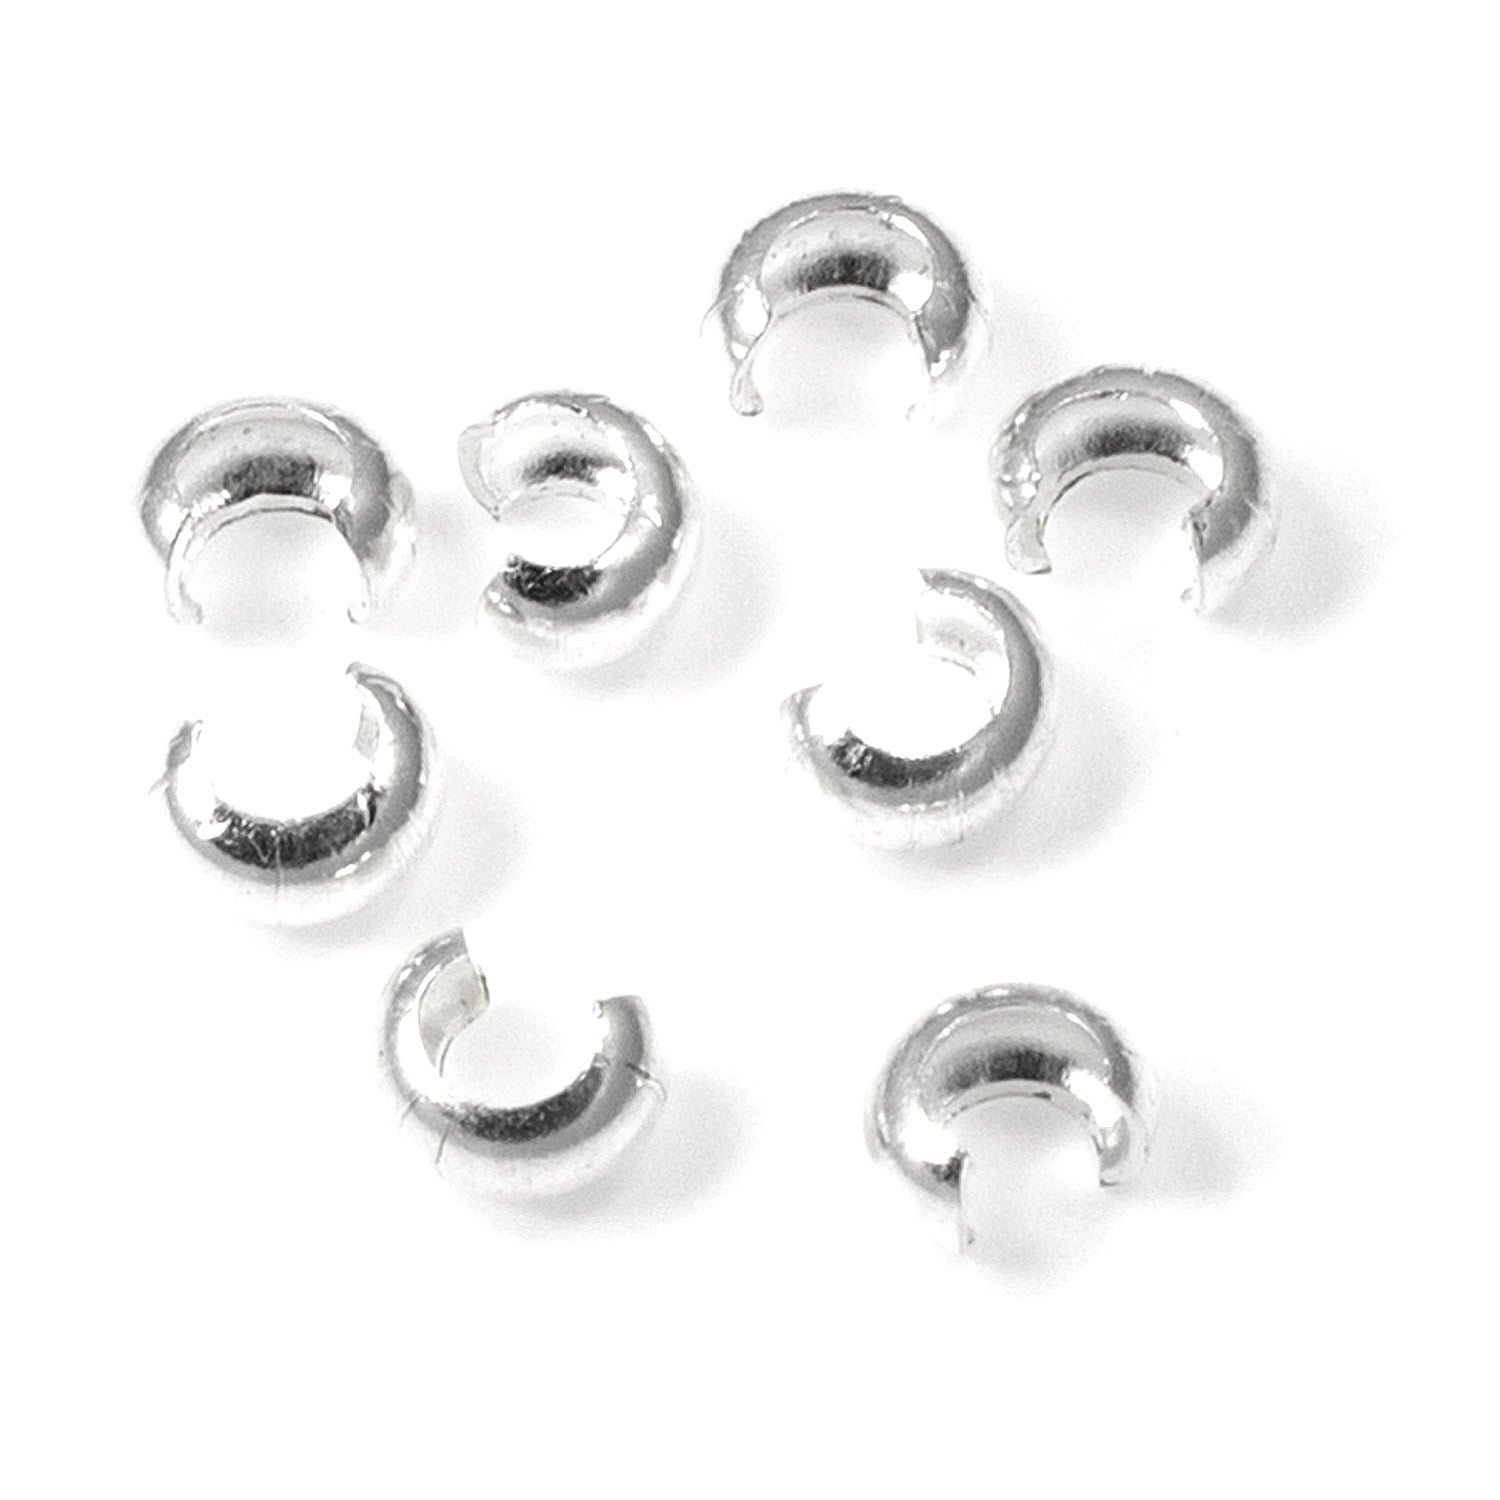 Silver Plated Crimp Bead Covers, TierraCast 3mm 50/PKG